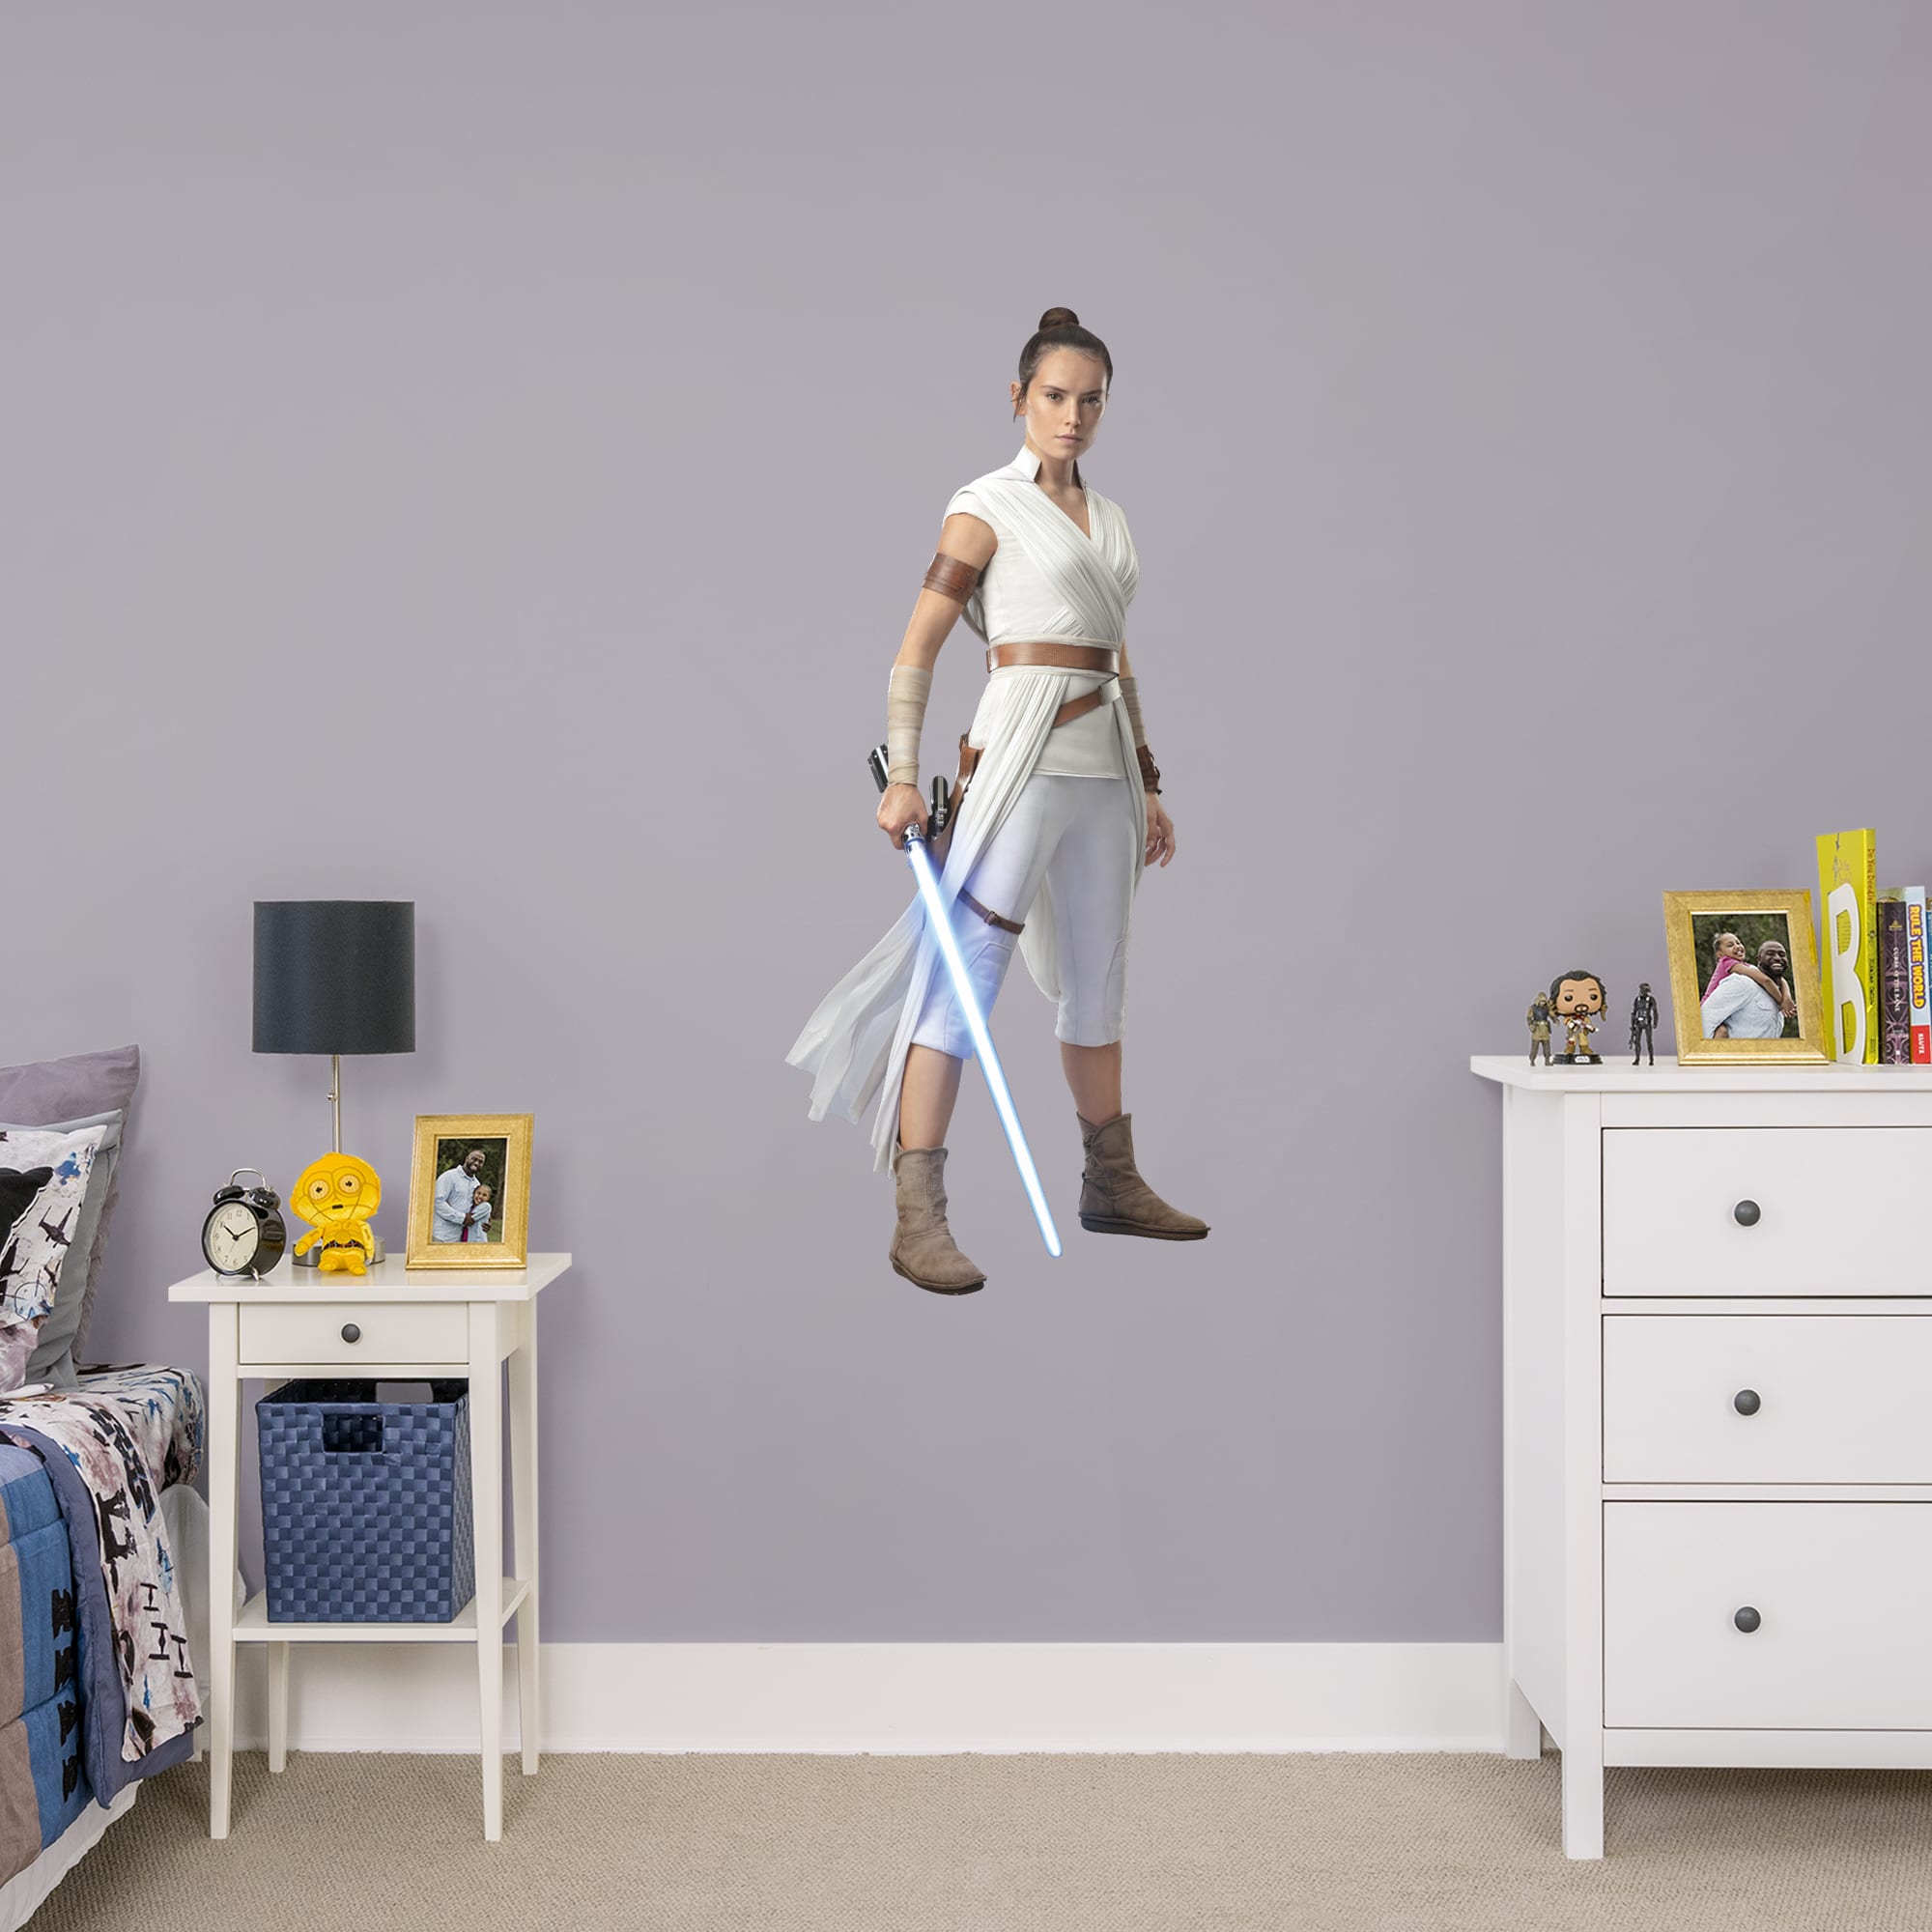 Rey - Officially Licensed Removable Wall Decal Giant Character + 2 Decals (22"W x 51"H) by Fathead | Vinyl